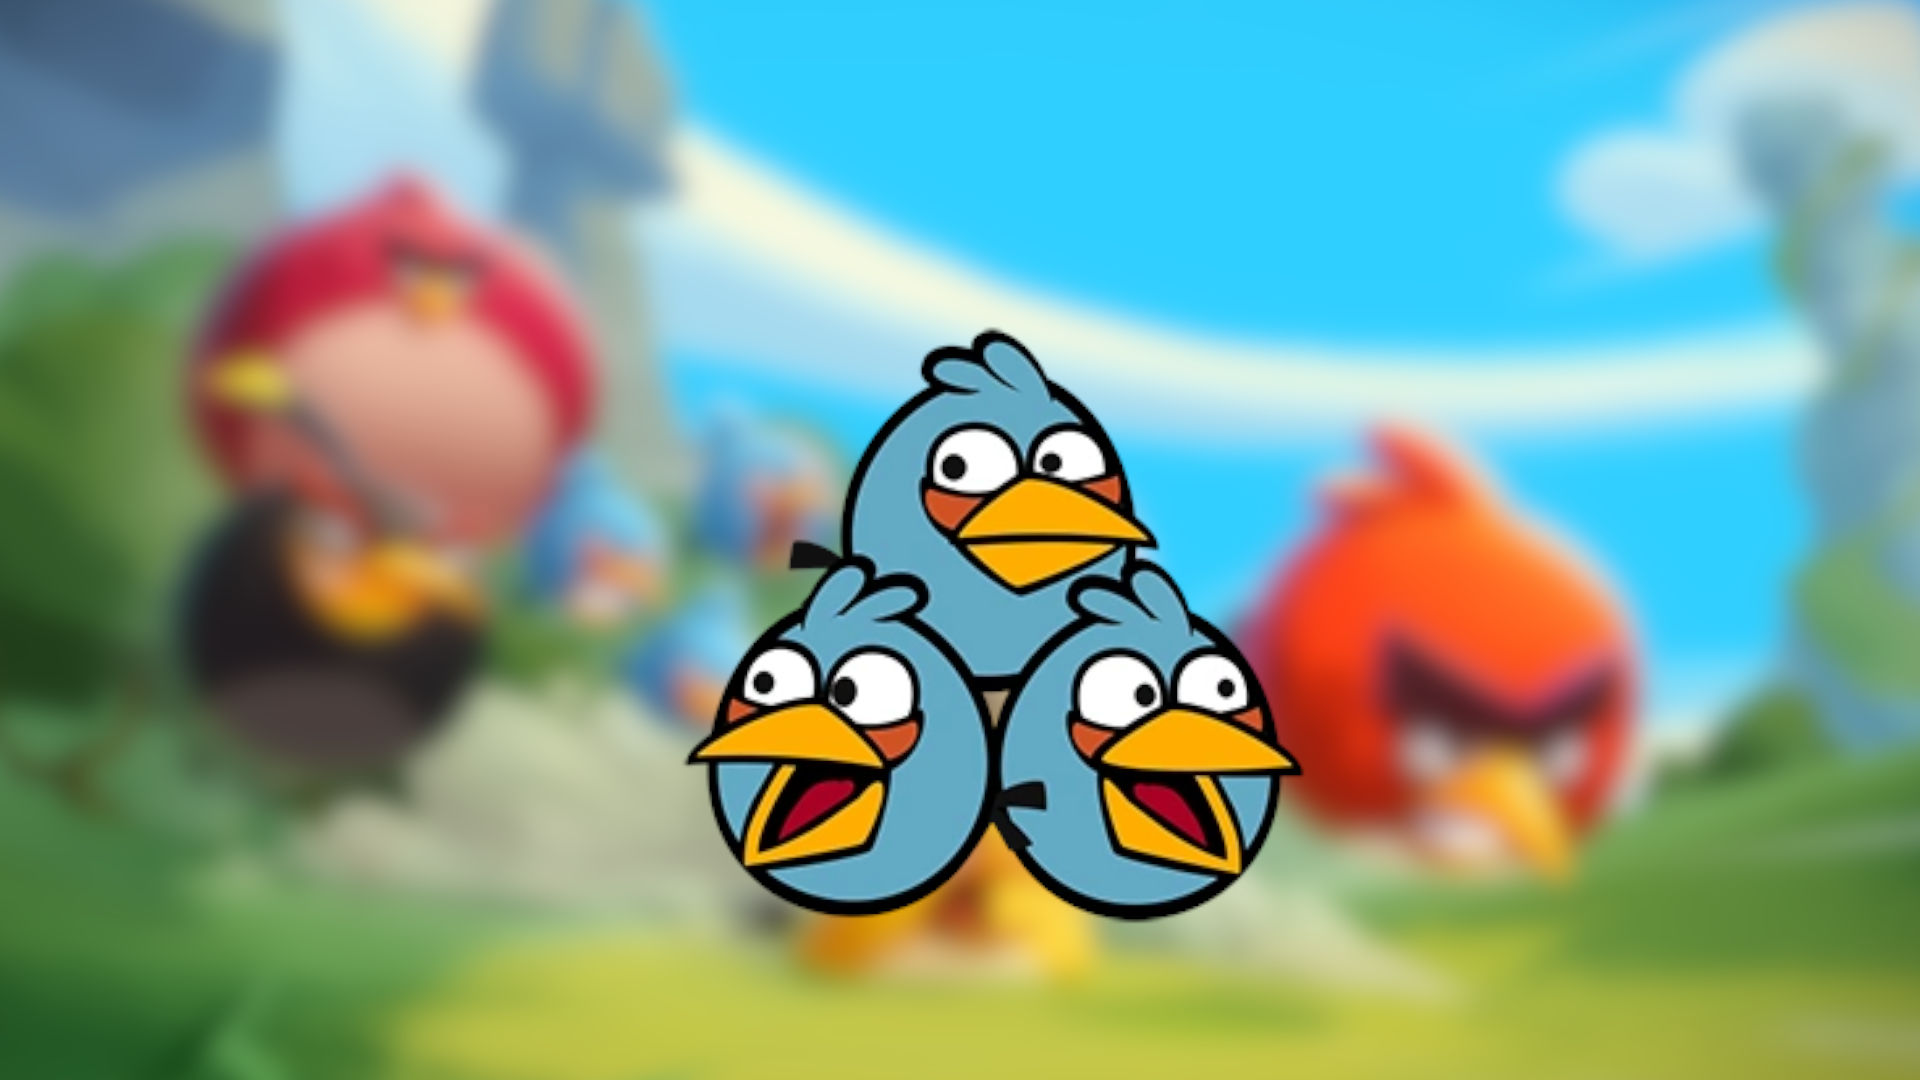 Angry Birds characters the Blues